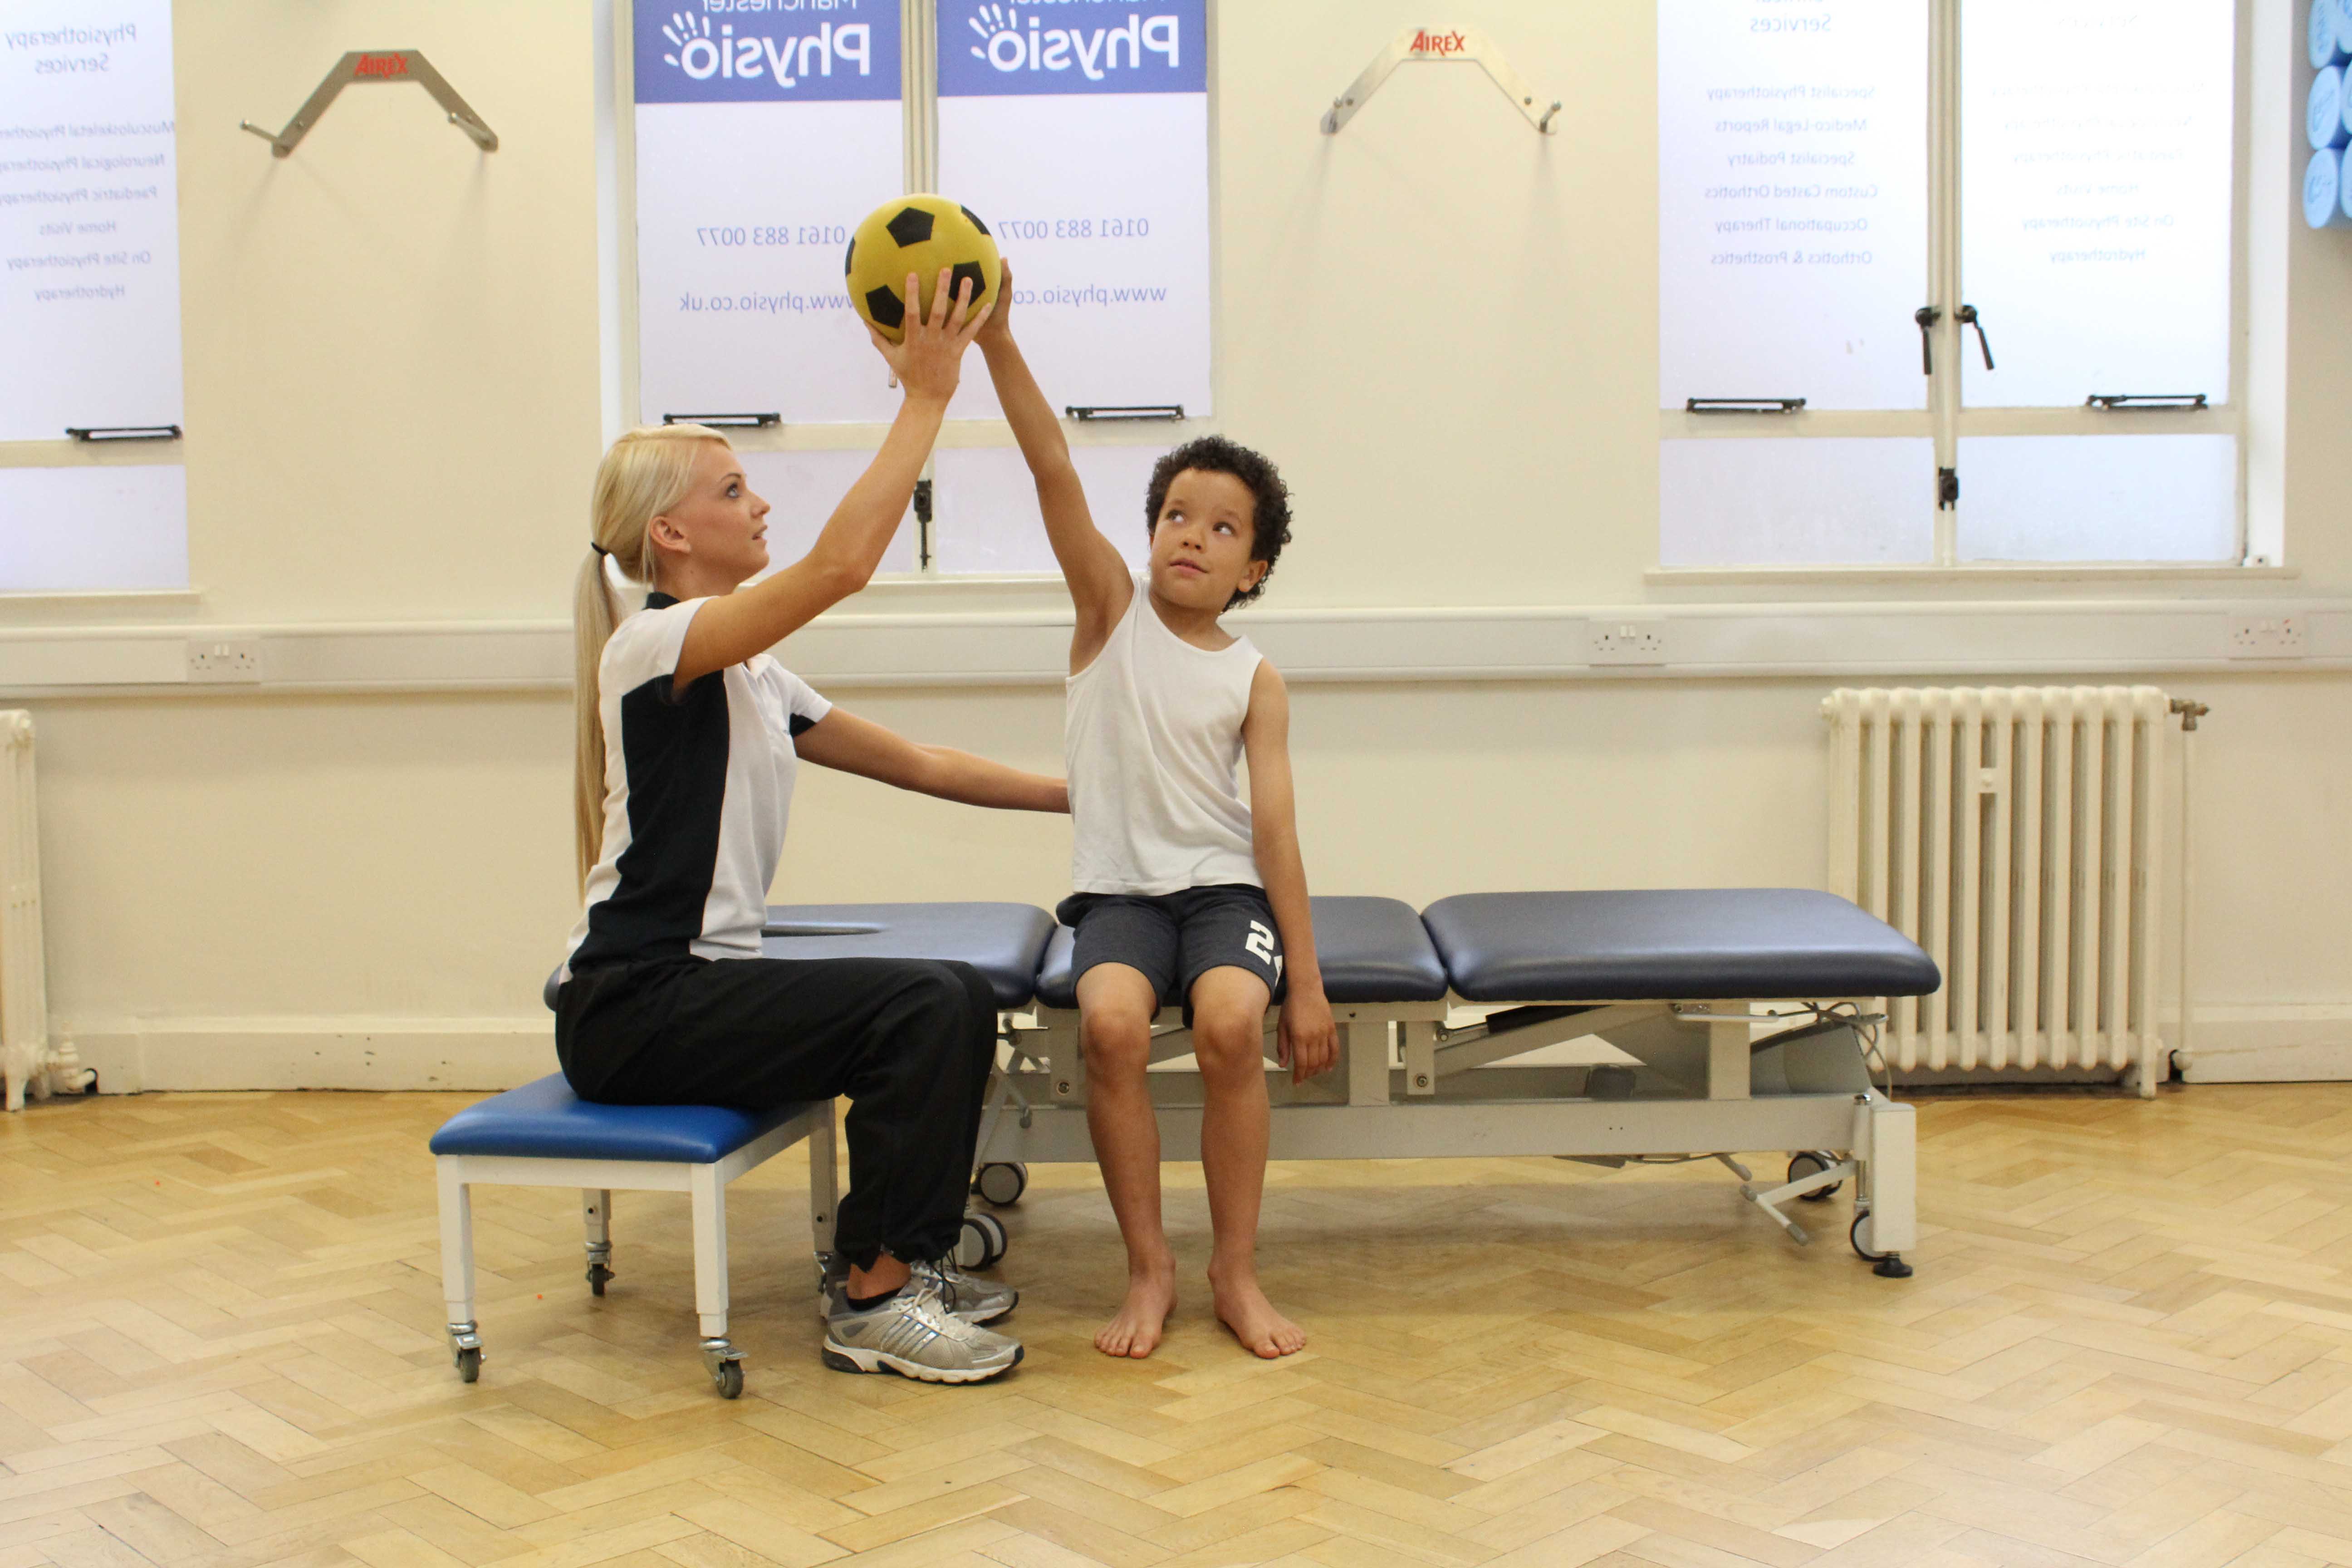 Dynamic strength exercises performed with assistance of paediatric physiotherapist